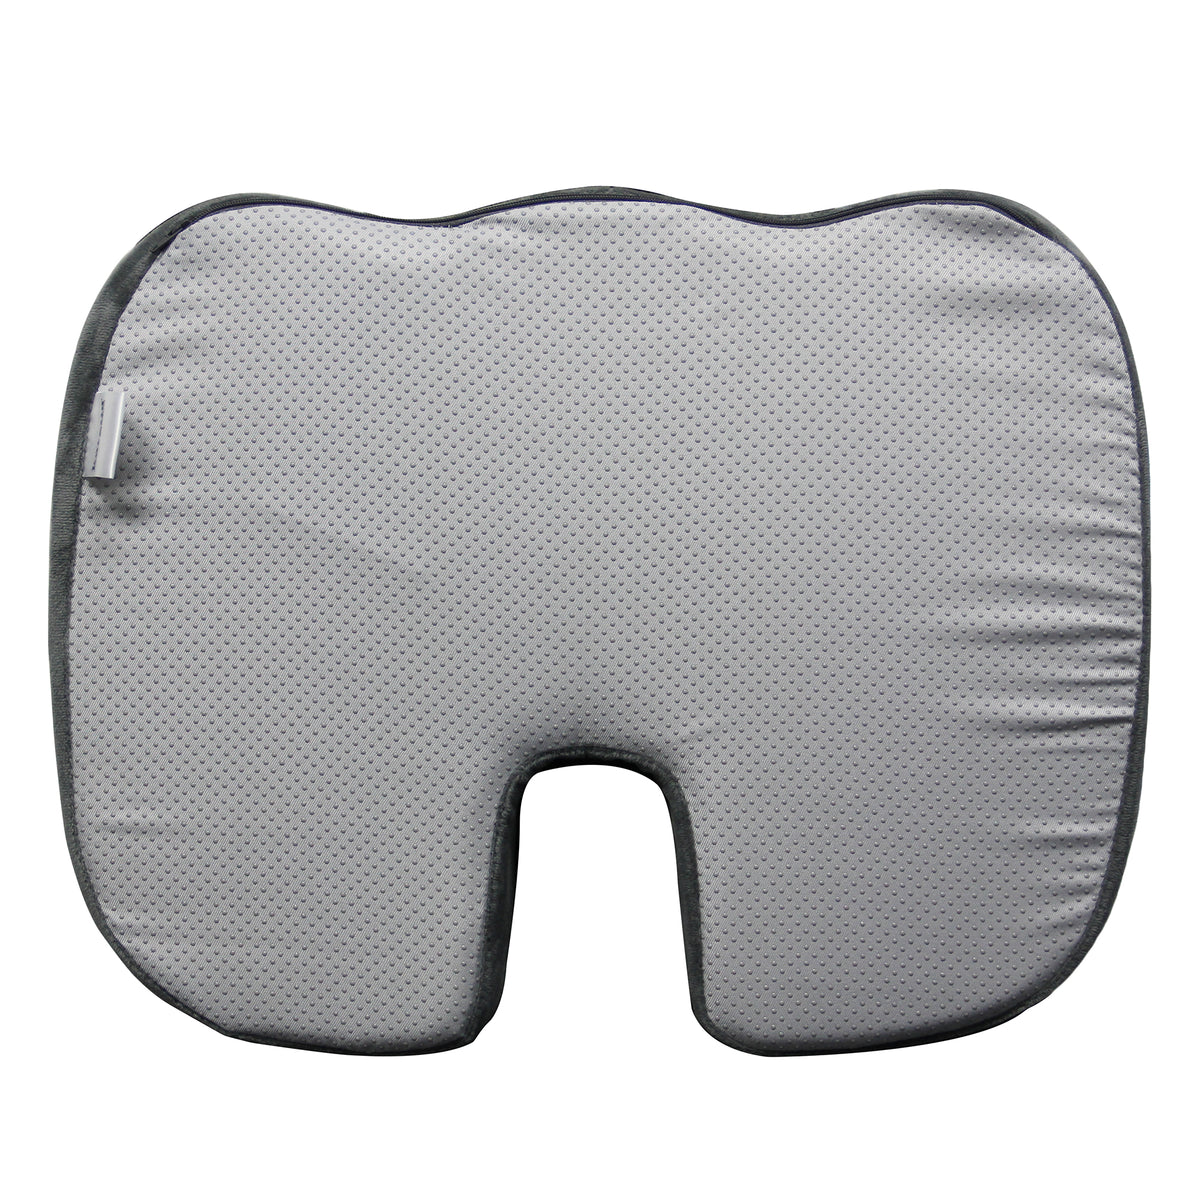  Seat Cushion, Seat Cushion for Office Chair, Lumbar Support  Pillow for Office Desk Chair, Car, Wheelchair Memory Foam Chair Cushion for  Sciatica, Coccyx Back with Covers Protects : Everything Else